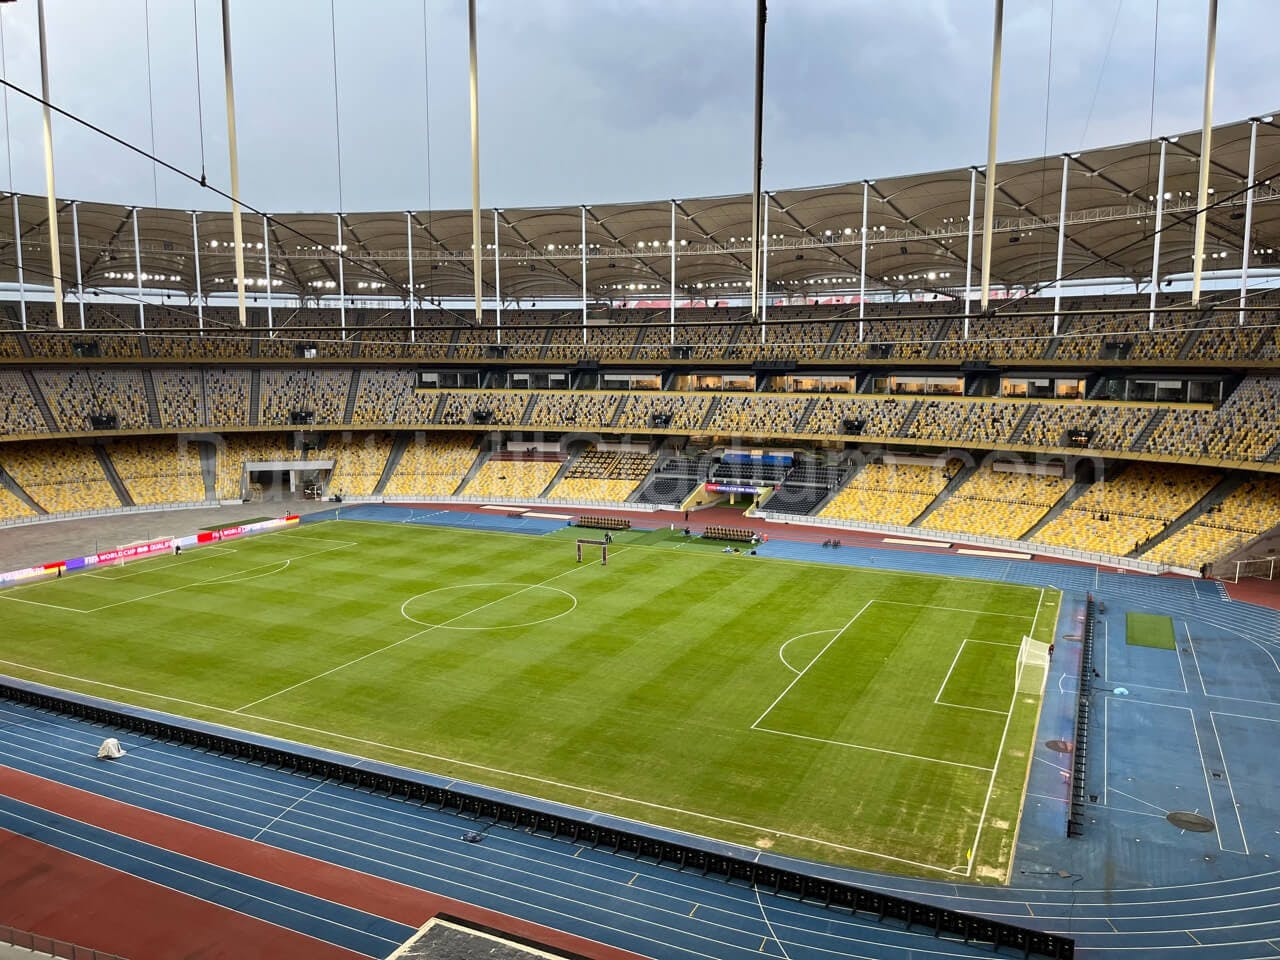 1x View of Bukit Jalil field from section 311 of Stadium Bukit Jalil.